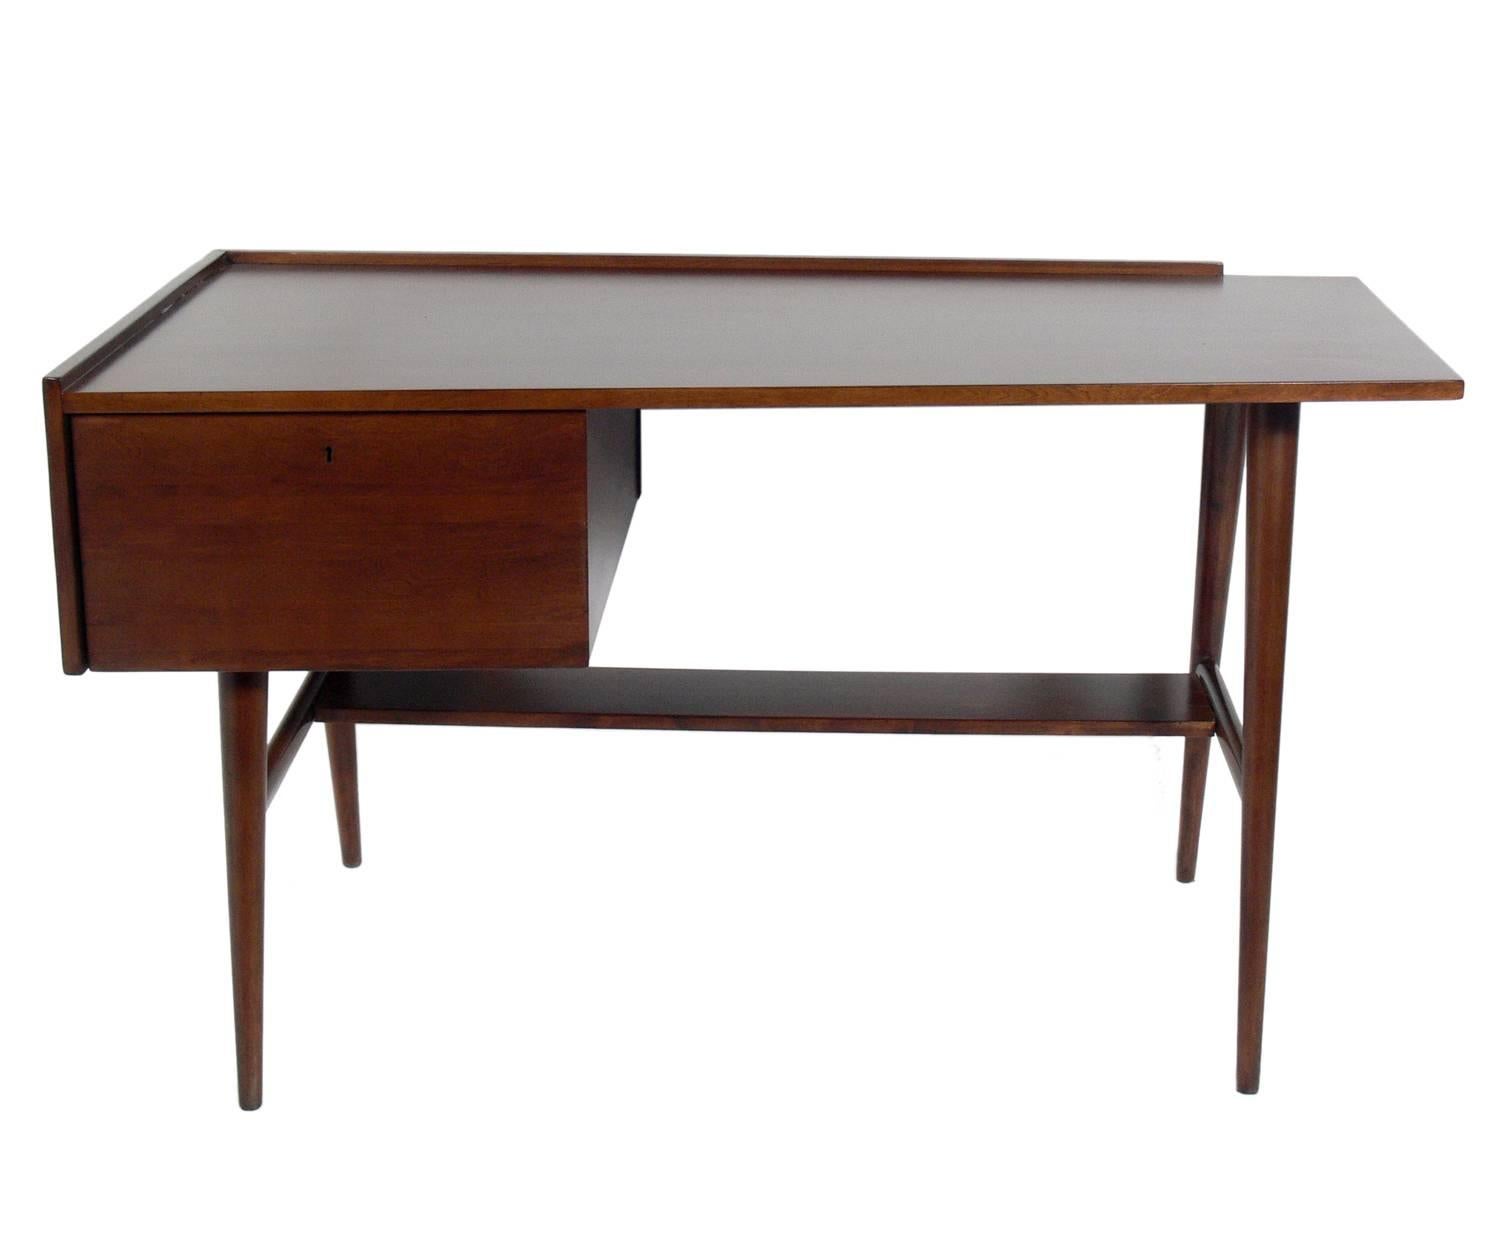 Midcentury desk and chair, designed by Edmund Spence, Sweden, circa 1960s. The desk has a clean lined Danish modern look, and contrasts nicely with the chair which has a very curvaceous design and looks great from any angle. The desk chair measures